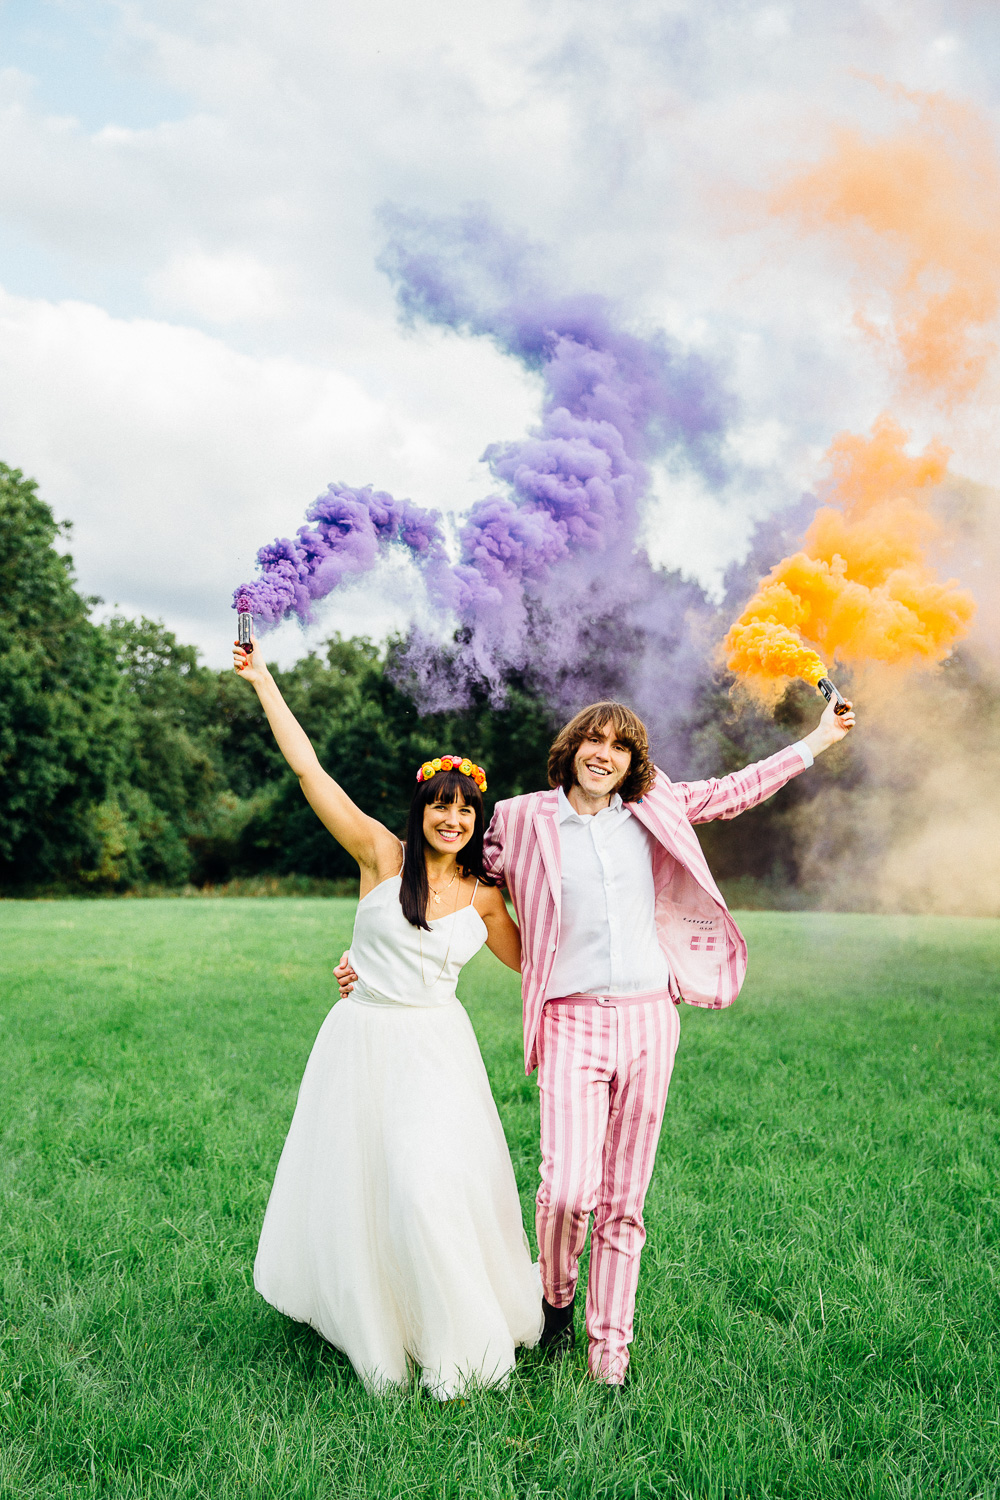 A Festival Wedding With Colourful Smoke Bombs, Wild Flowers + a